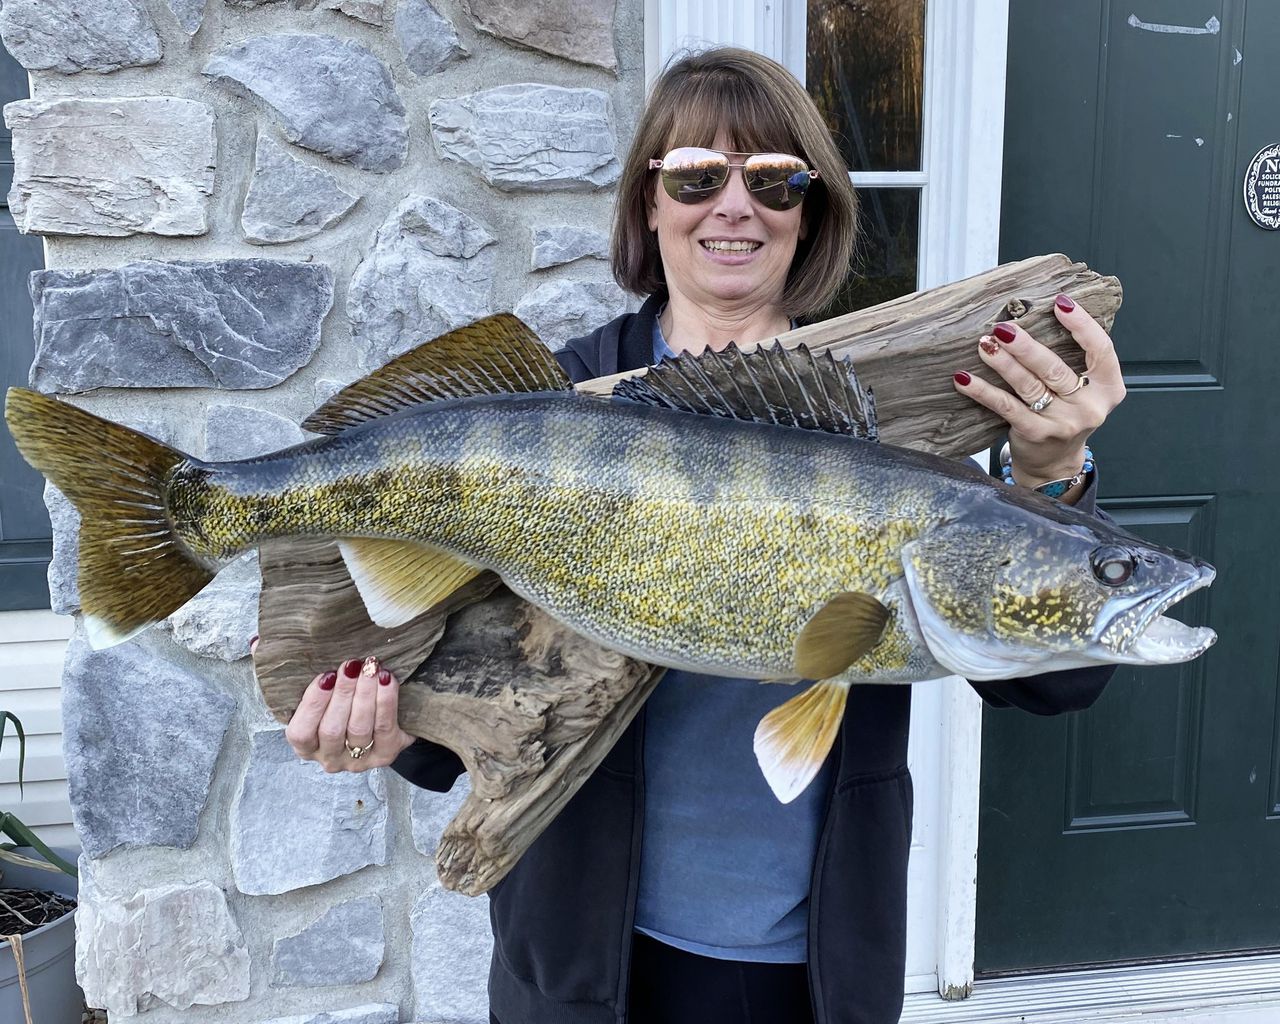 Angler uncorks enormous walleye from ice on lake ontario